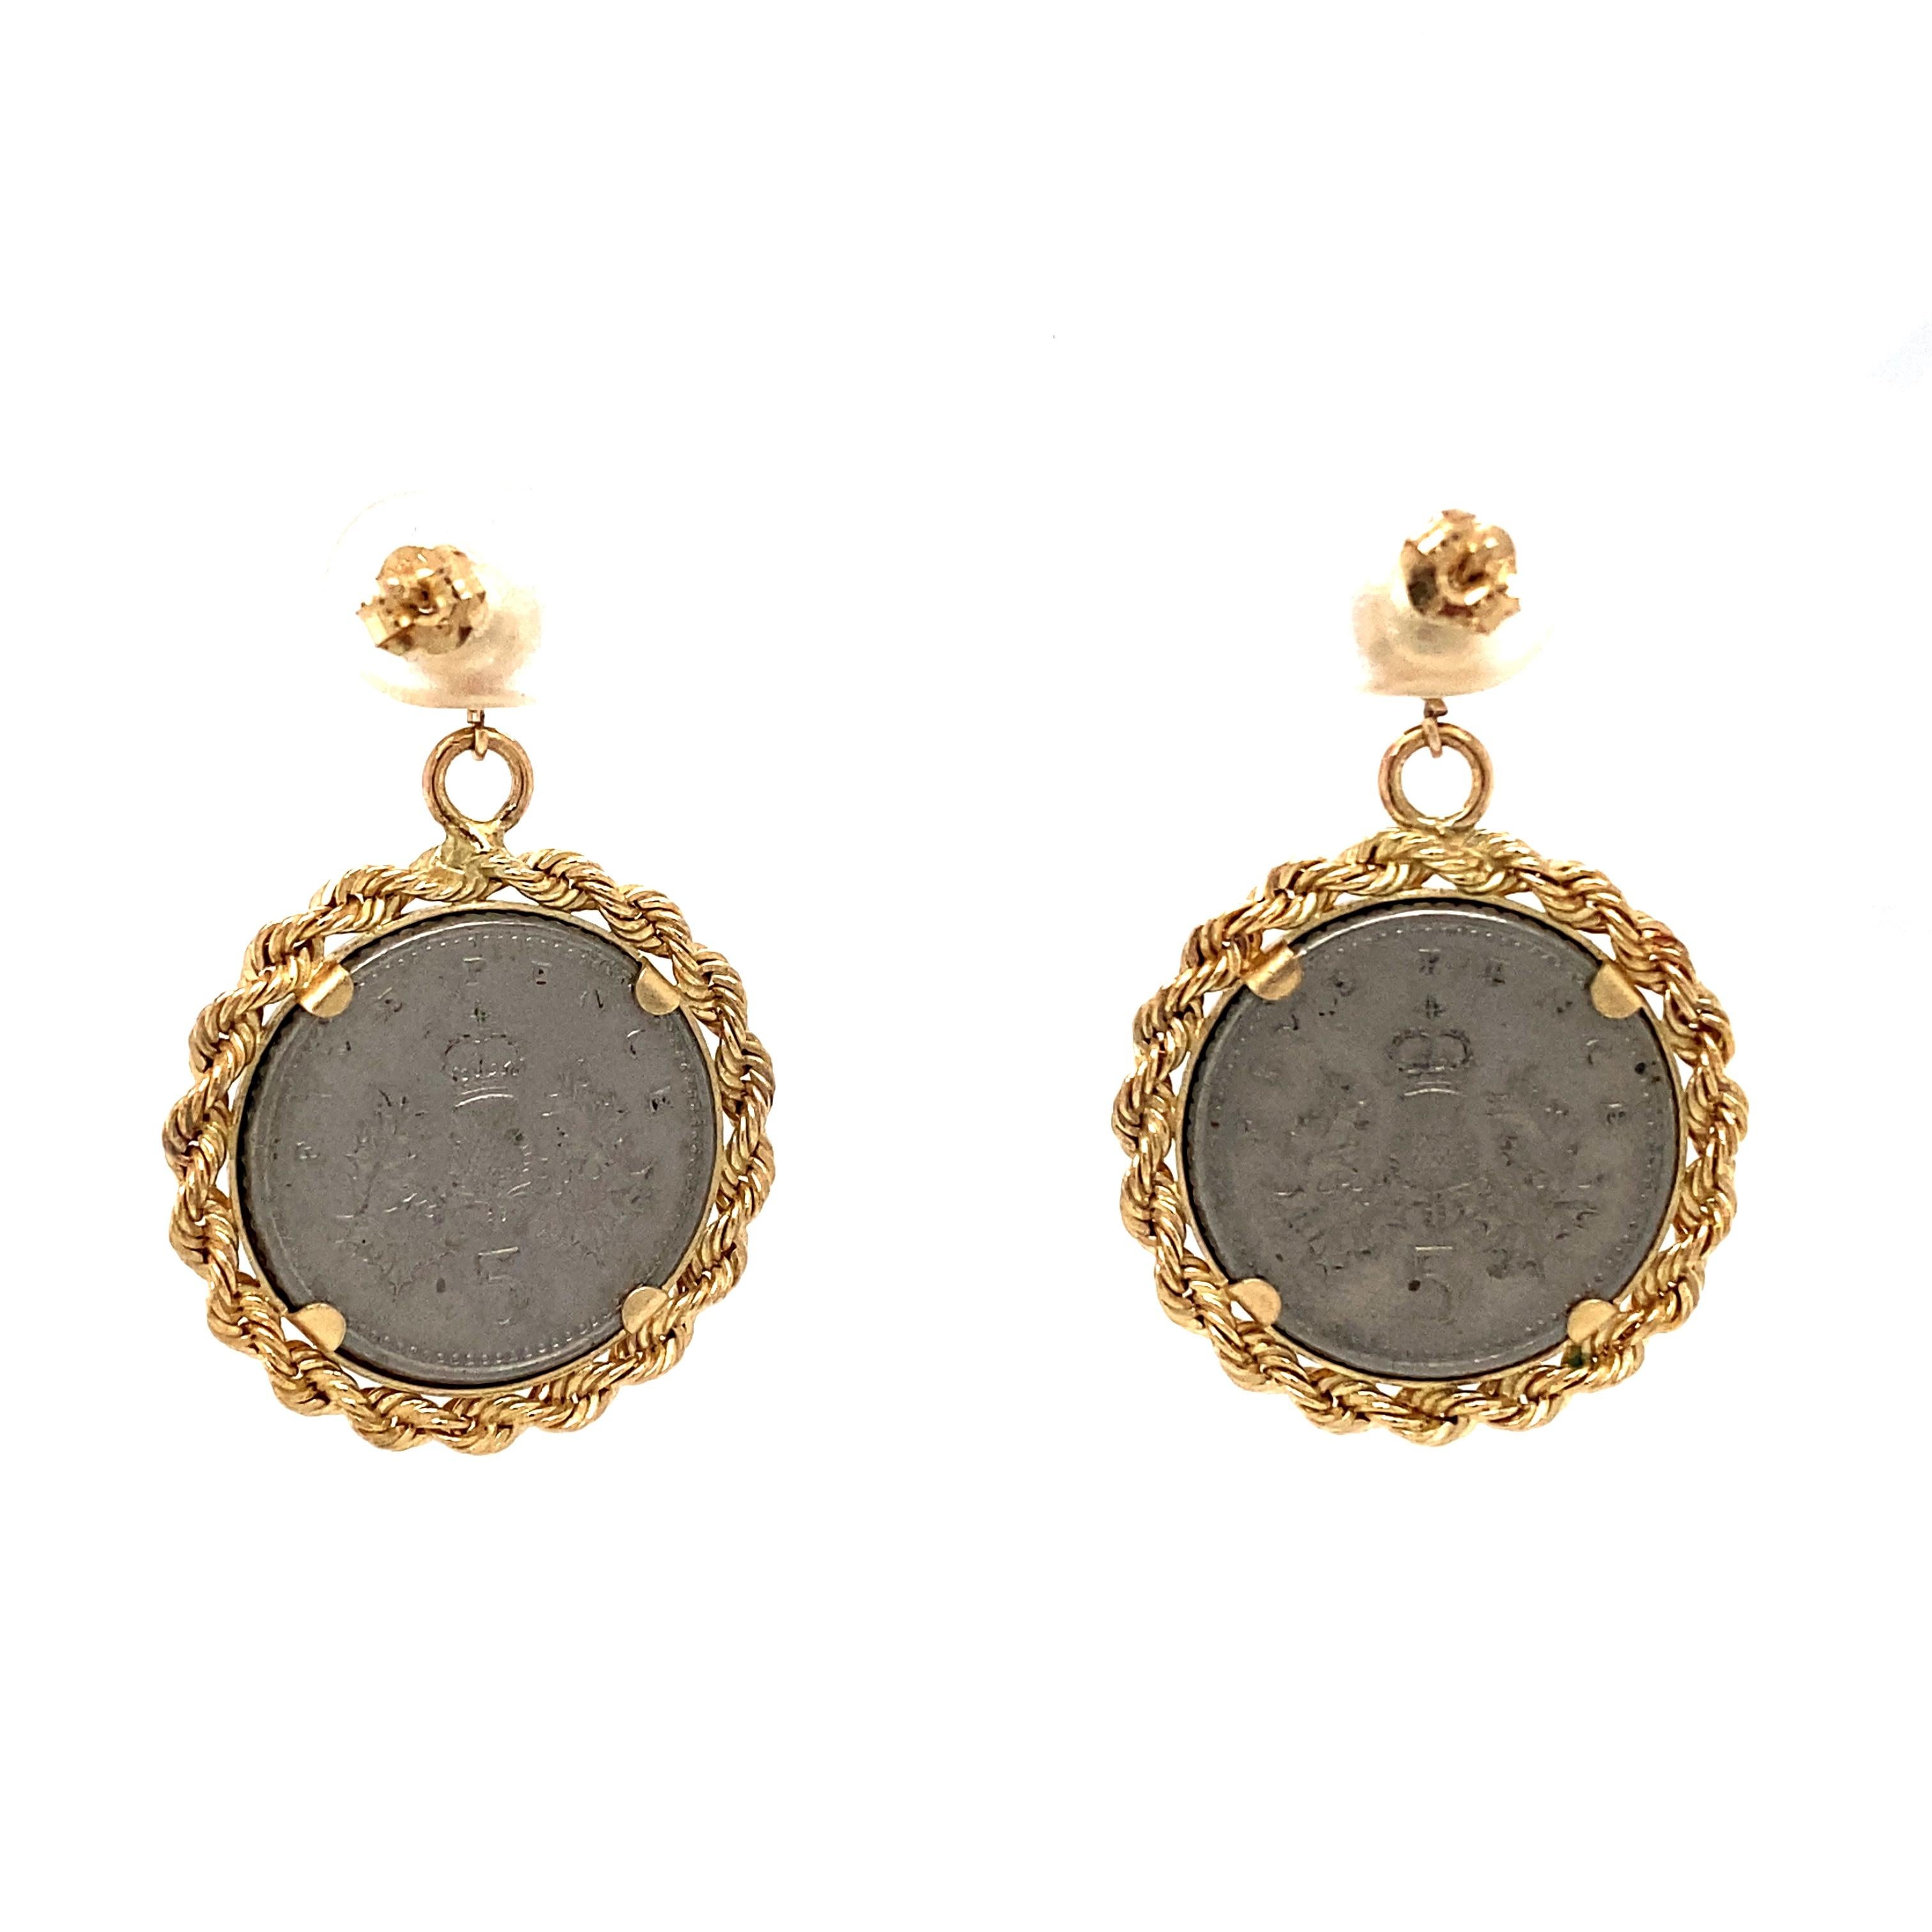 1990s Five British Pence Coin Earrings with Rope Frames in 14 Karat Gold In Excellent Condition For Sale In Atlanta, GA